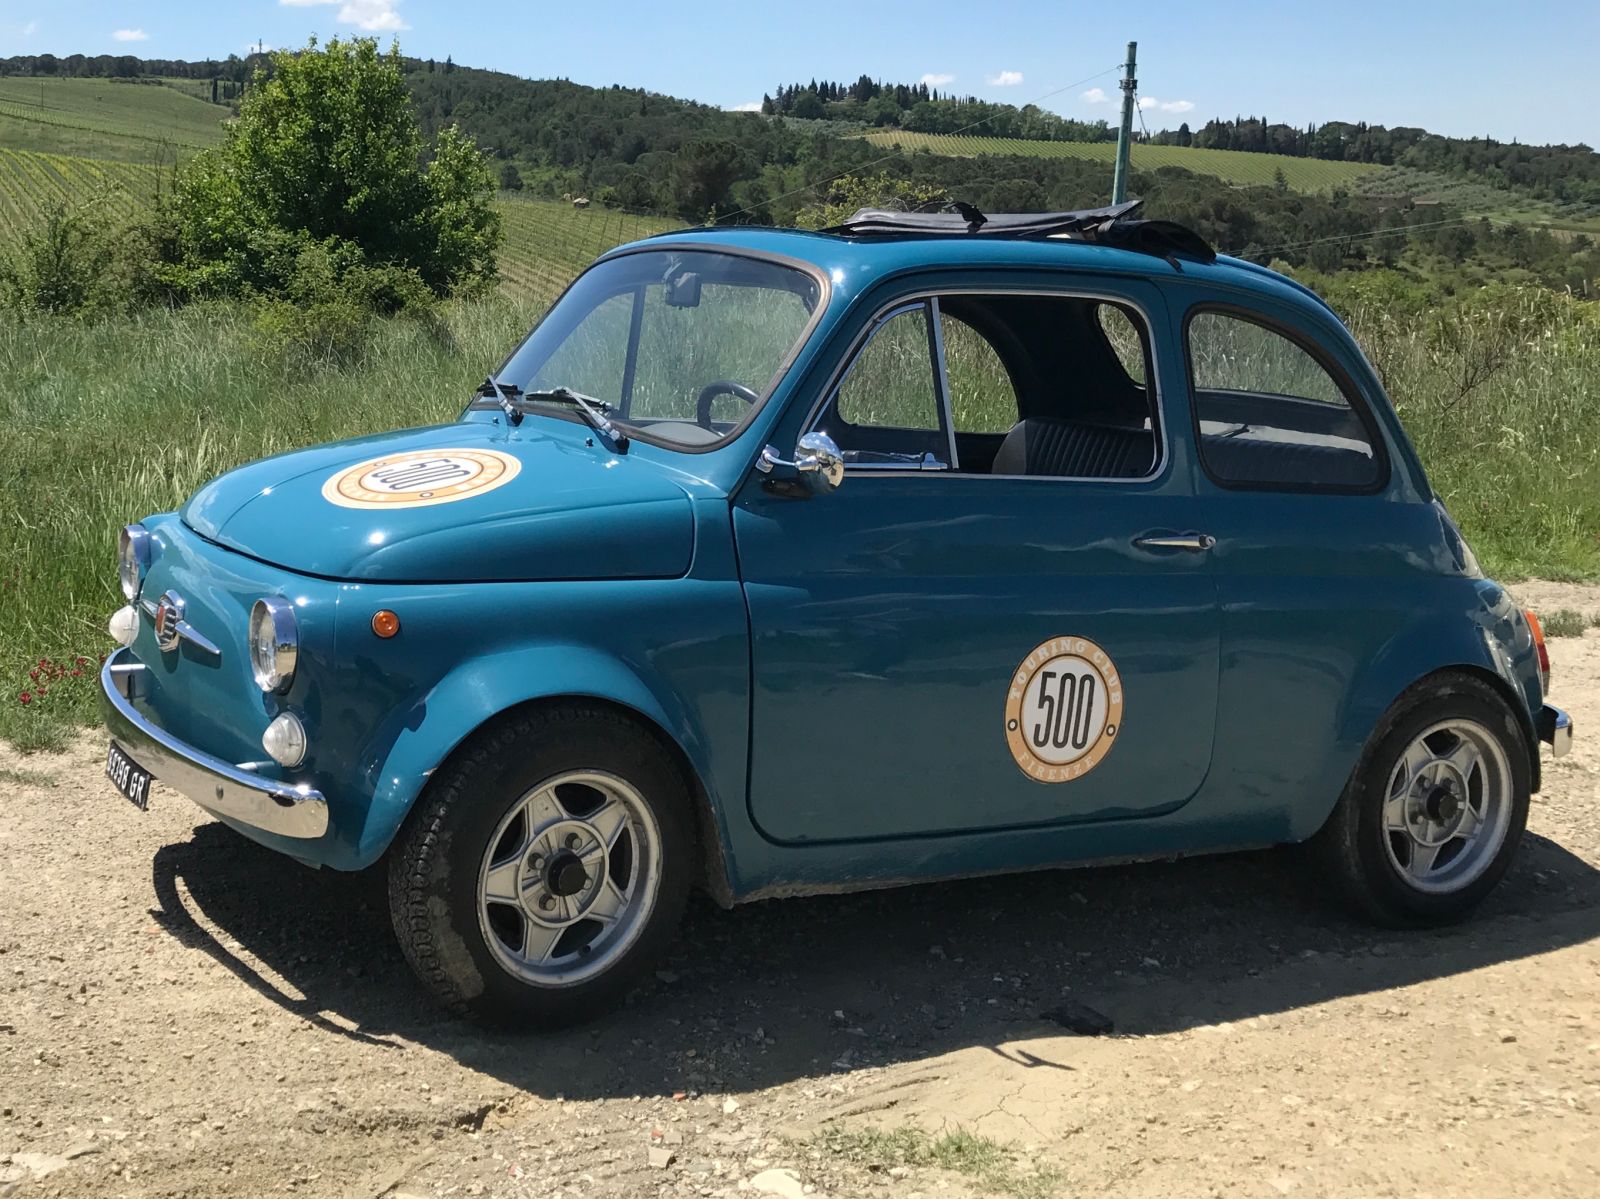 Driving this little guy around the Tuscan hills is the automotive equivalent of a Swedish massage. Tranquil relaxation.